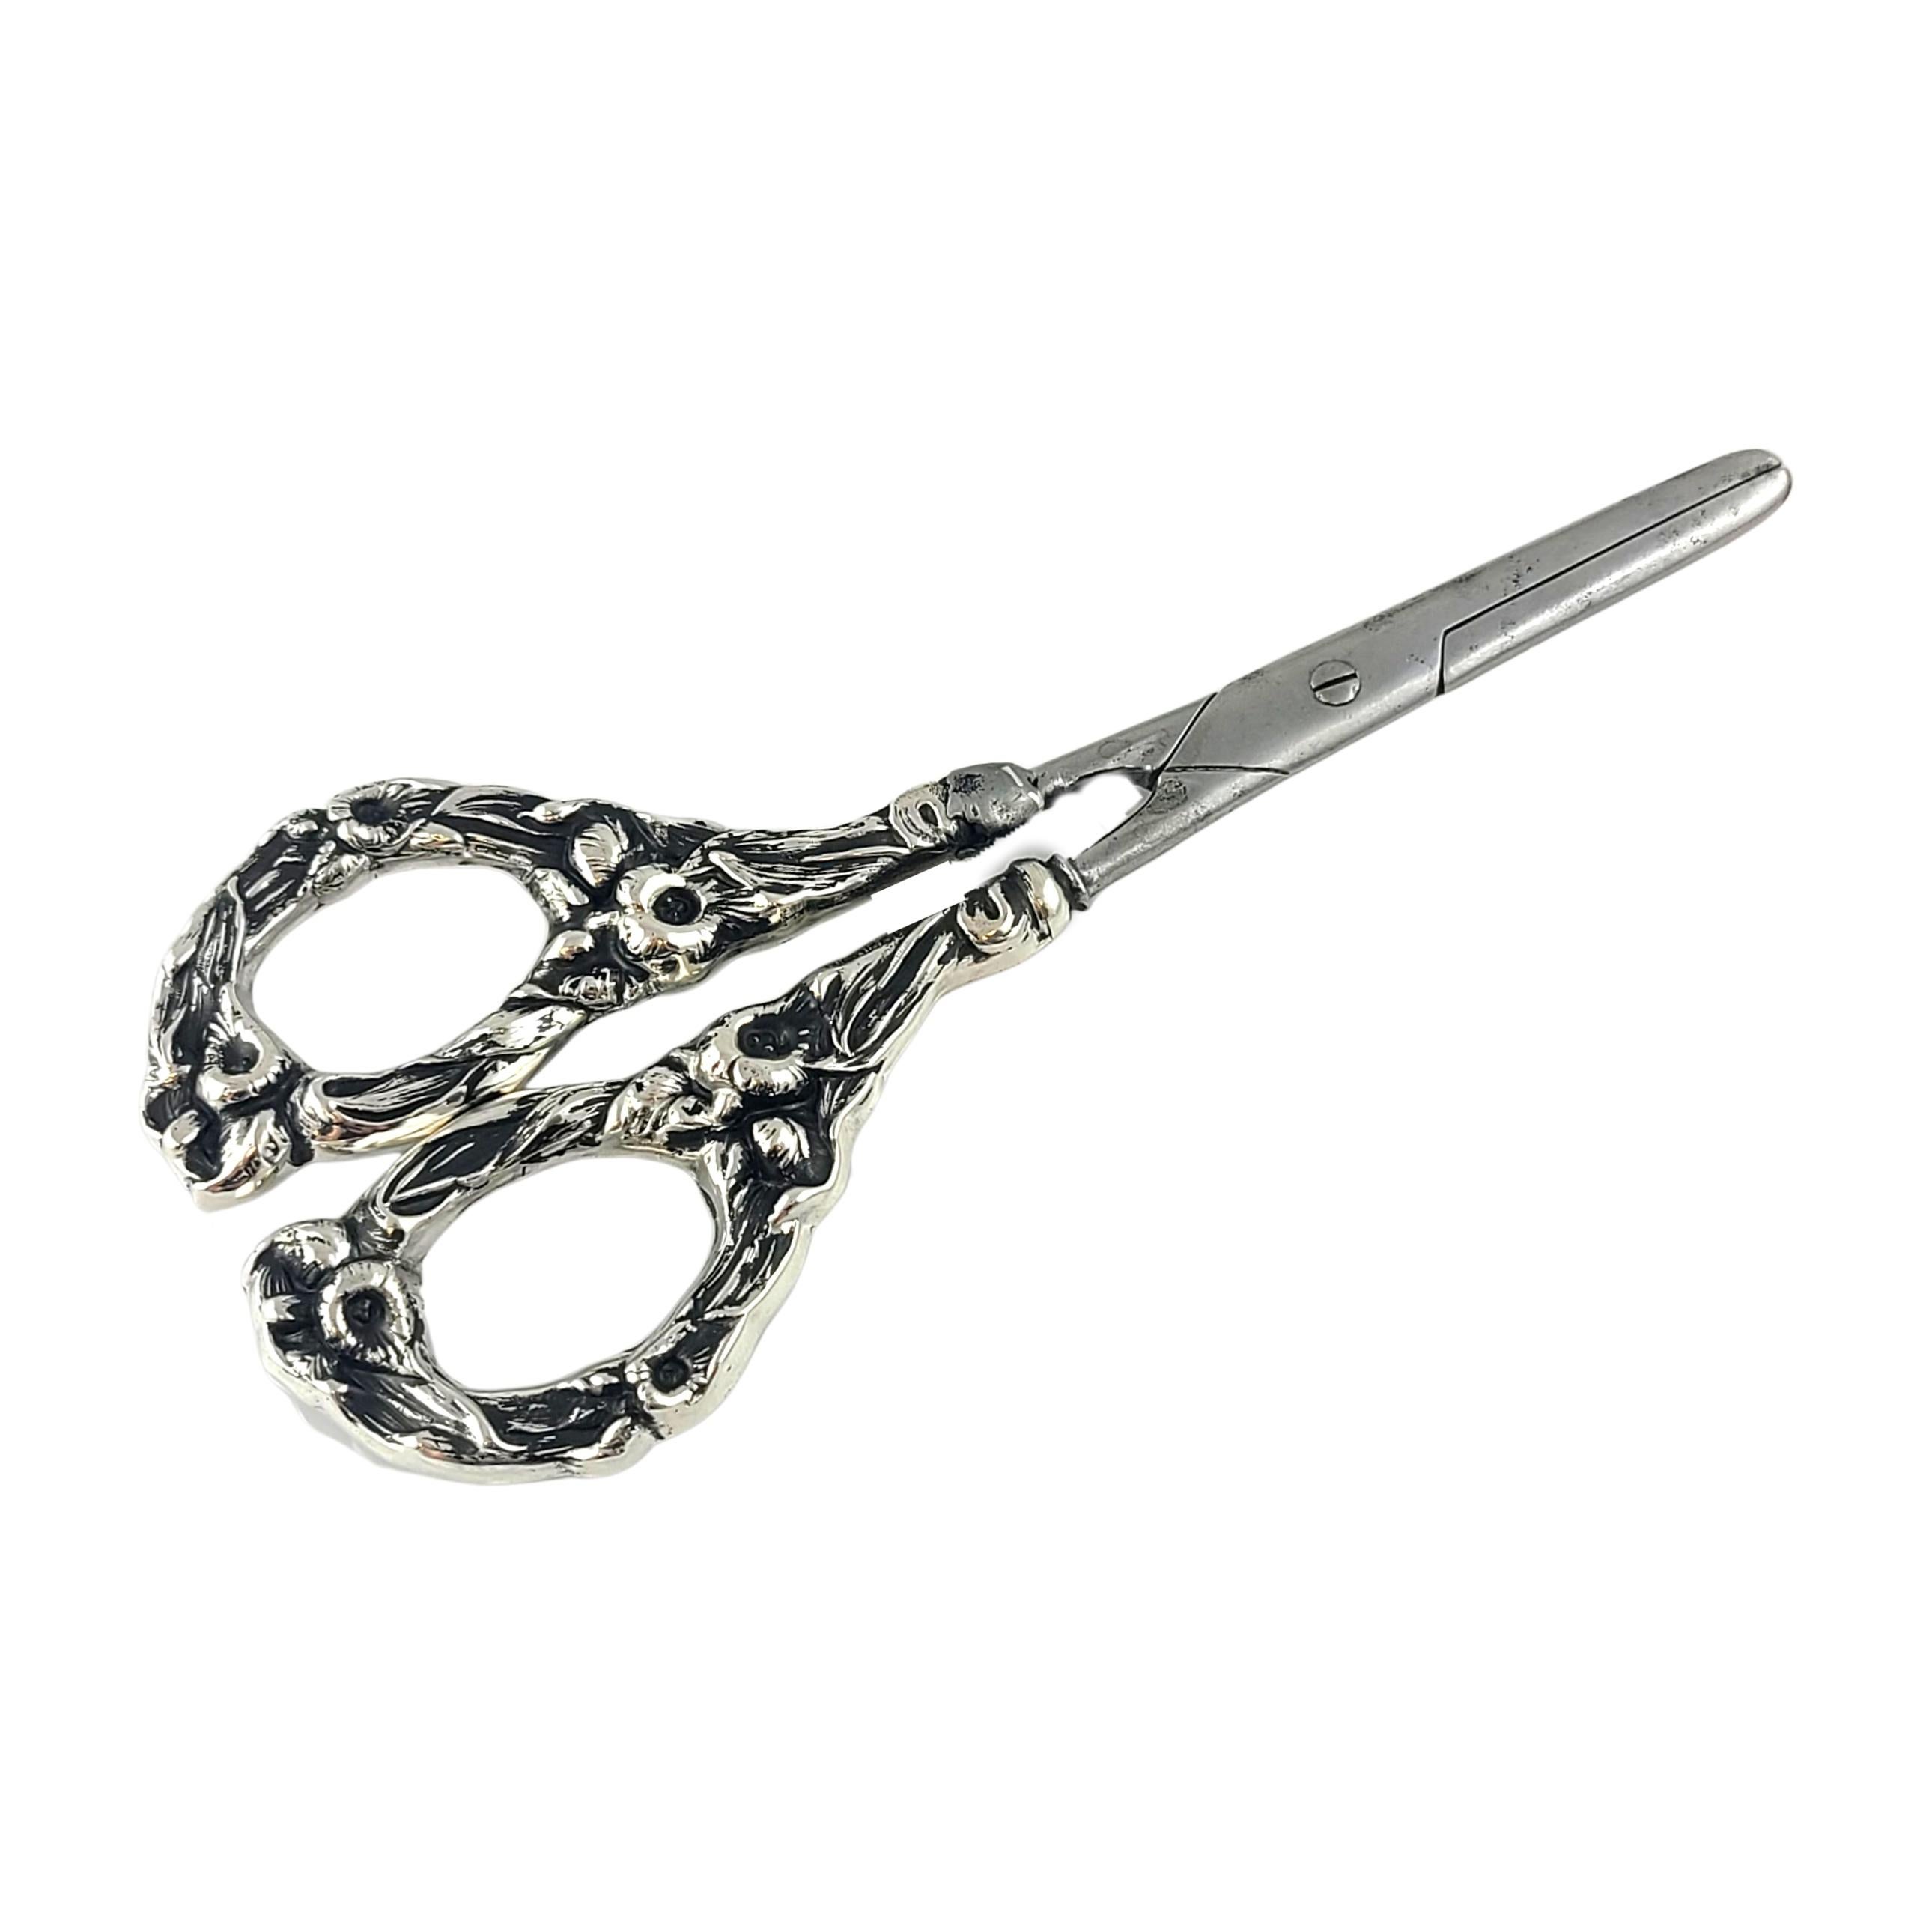 Sterling silver grape shears/scissors by Watson.

Monograms appear to be THJ and 1900.

Watson of Attleboro, MA were manufacturers of silver novelties from 1880-1950. These grape shears feature floral sterling handles and German stainless steel